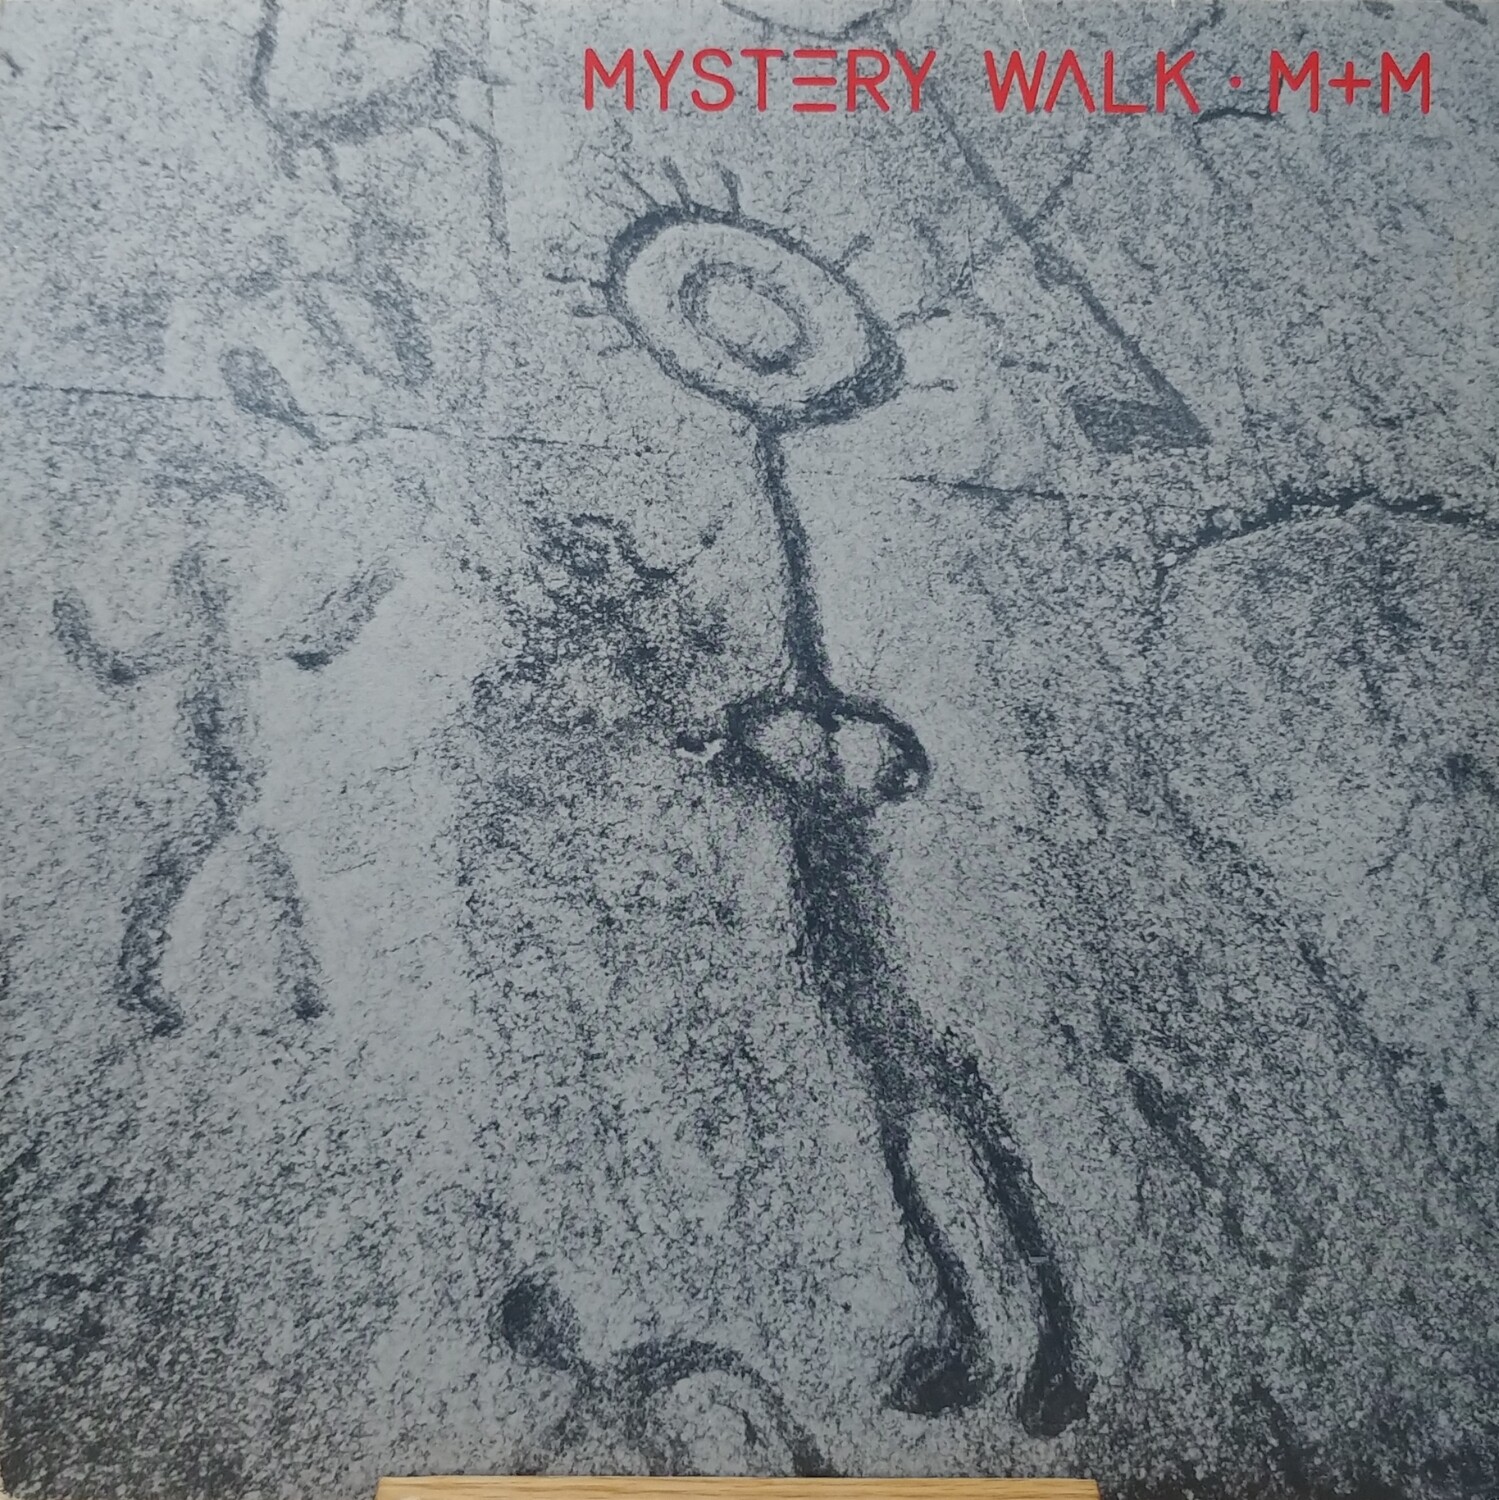 M + M : Martha and The Muffins - Mystery Walk